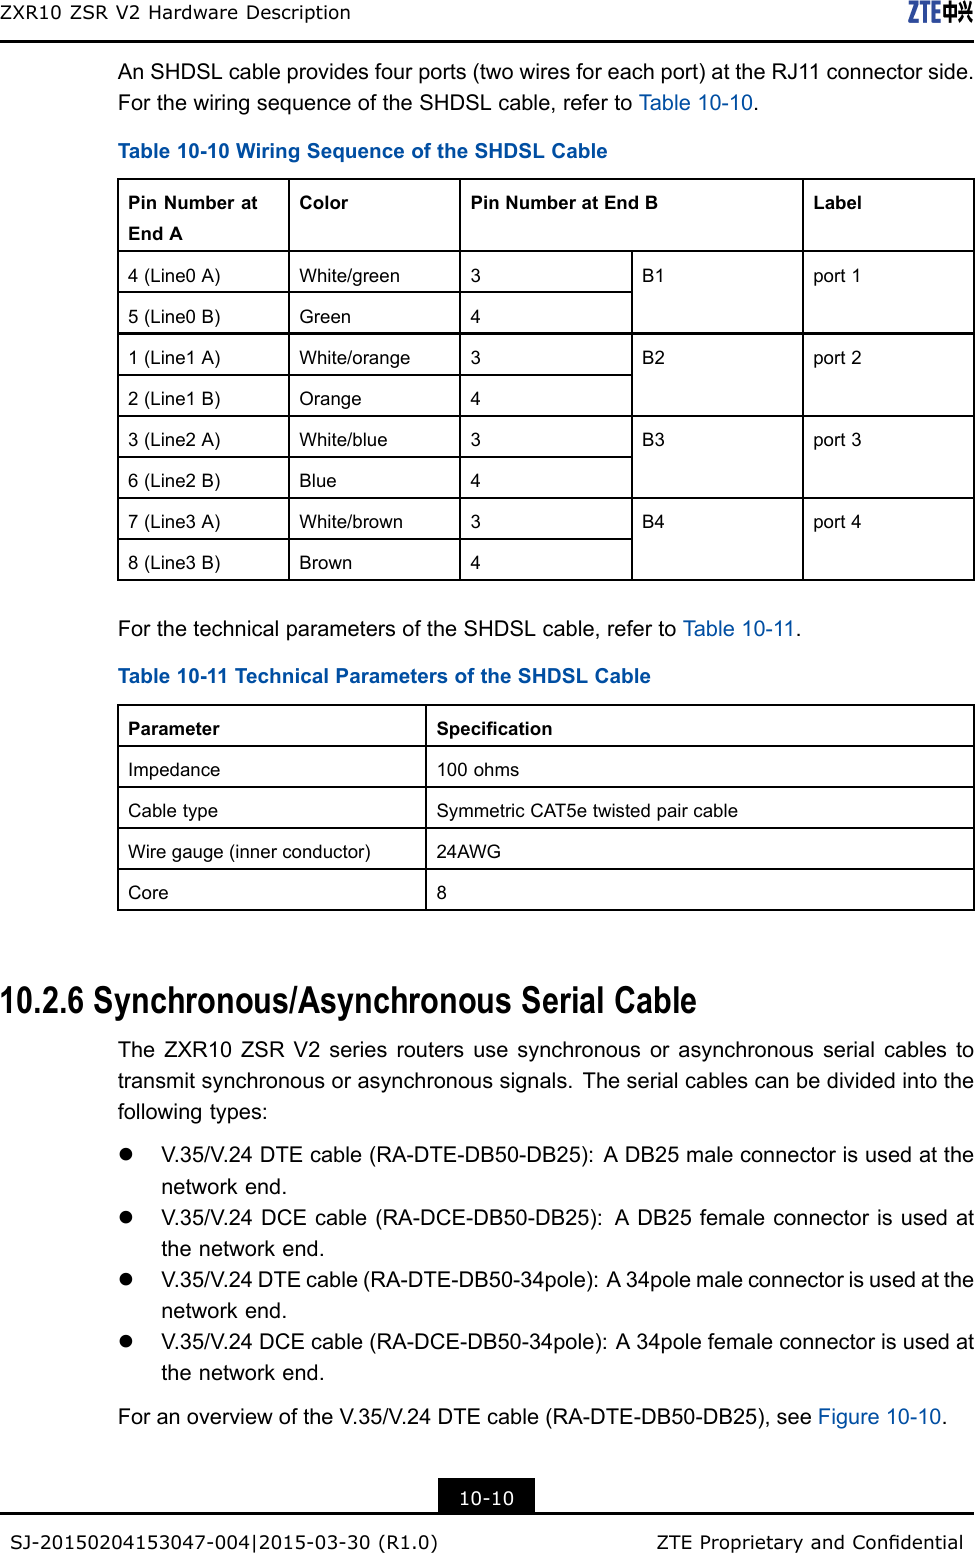 ZXR10ZSRV2HardwareDescriptionAnSHDSLcableprovidesfourports(twowiresforeachport)attheRJ11connectorside.ForthewiringsequenceoftheSHDSLcable,refertoTable10-10.Table10-10WiringSequenceoftheSHDSLCablePinNumberatEndAColorPinNumberatEndBLabel4(Line0A)White/green35(Line0B)Green4B1port11(Line1A)White/orange32(Line1B)Orange4B2port23(Line2A)White/blue36(Line2B)Blue4B3port37(Line3A)White/brown38(Line3B)Brown4B4port4ForthetechnicalparametersoftheSHDSLcable,refertoTable10-11.Table10-11TechnicalParametersoftheSHDSLCableParameterSpecicationImpedance100ohmsCabletypeSymmetricCAT5etwistedpaircableWiregauge(innerconductor)24AWGCore810.2.6Synchronous/AsynchronousSerialCableTheZXR10ZSRV2seriesroutersusesynchronousorasynchronousserialcablestotransmitsynchronousorasynchronoussignals.Theserialcablescanbedividedintothefollowingtypes:lV.35/V.24DTEcable(RA-DTE-DB50-DB25):ADB25maleconnectorisusedatthenetworkend.lV.35/V.24DCEcable(RA-DCE-DB50-DB25):ADB25femaleconnectorisusedatthenetworkend.lV.35/V.24DTEcable(RA-DTE-DB50-34pole):A34polemaleconnectorisusedatthenetworkend.lV.35/V.24DCEcable(RA-DCE-DB50-34pole):A34polefemaleconnectorisusedatthenetworkend.ForanoverviewoftheV.35/V.24DTEcable(RA-DTE-DB50-DB25),seeFigure10-10.10-10SJ-20150204153047-004|2015-03-30(R1.0)ZTEProprietaryandCondential